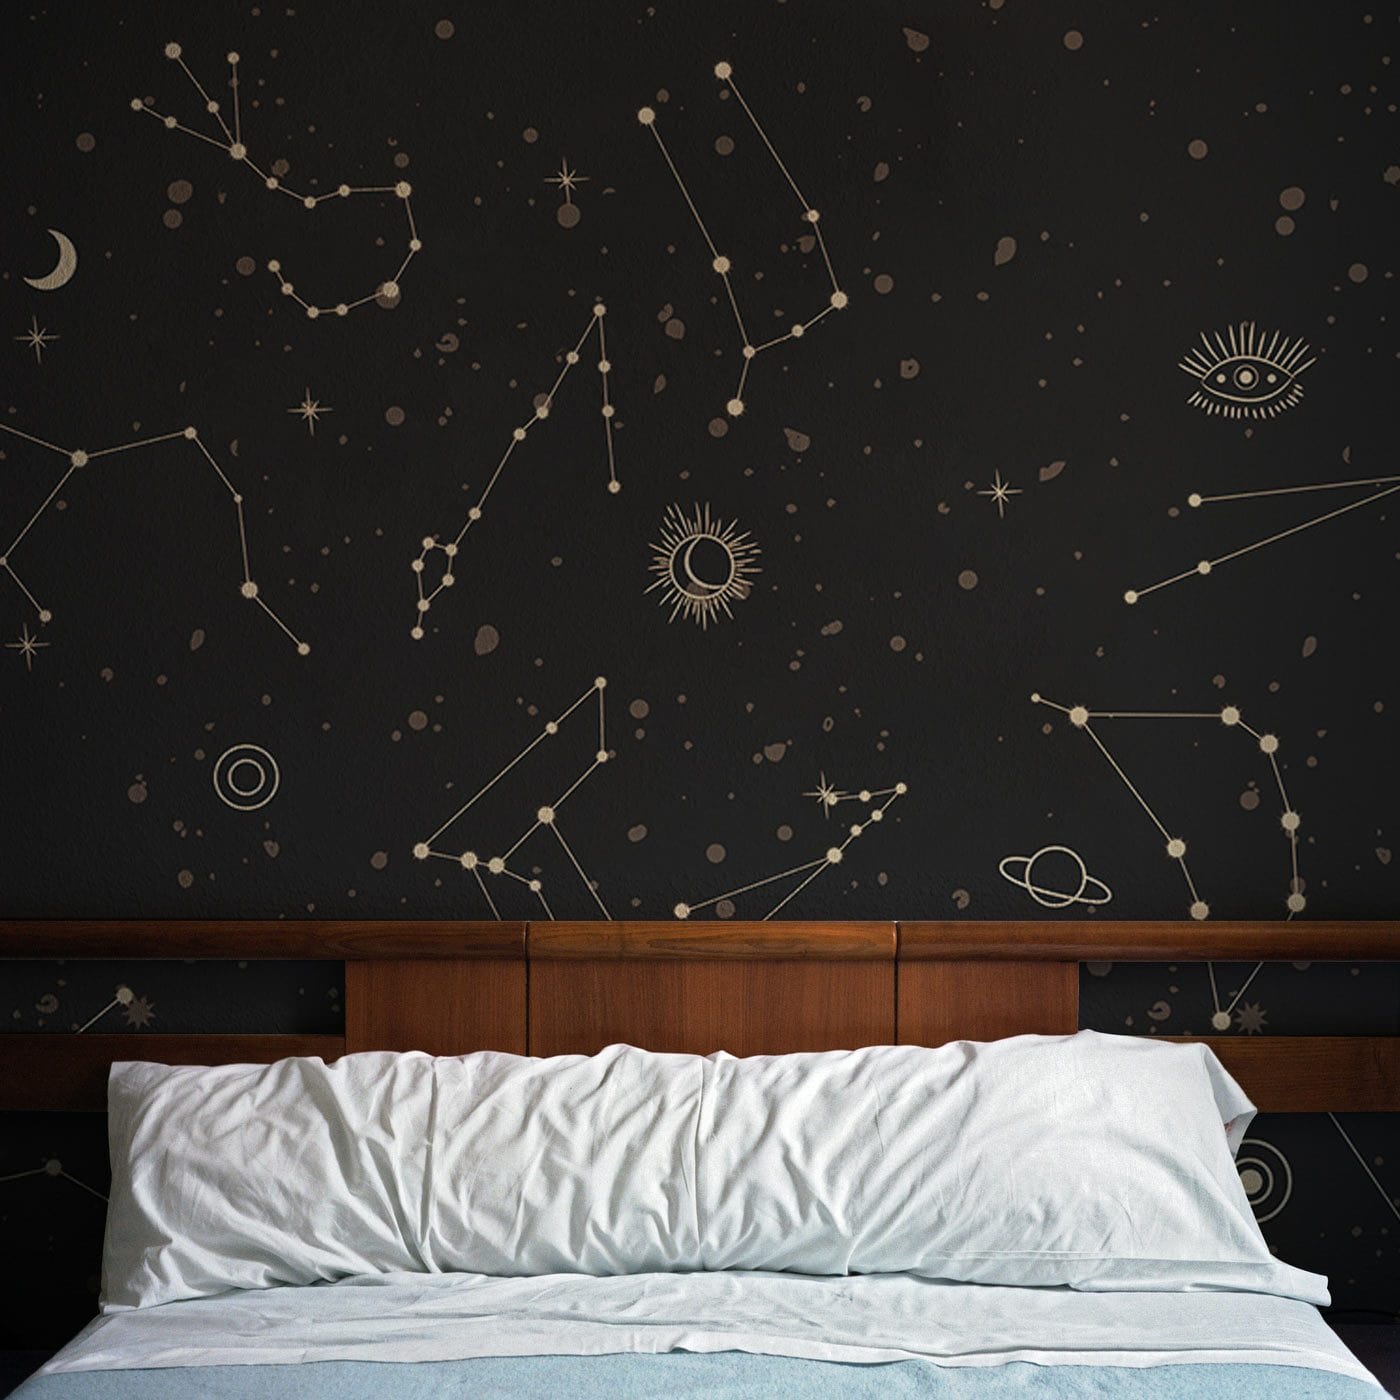 Pattern of Star Signs on Wallpaper Mural for Use as D��cor in Bedroom